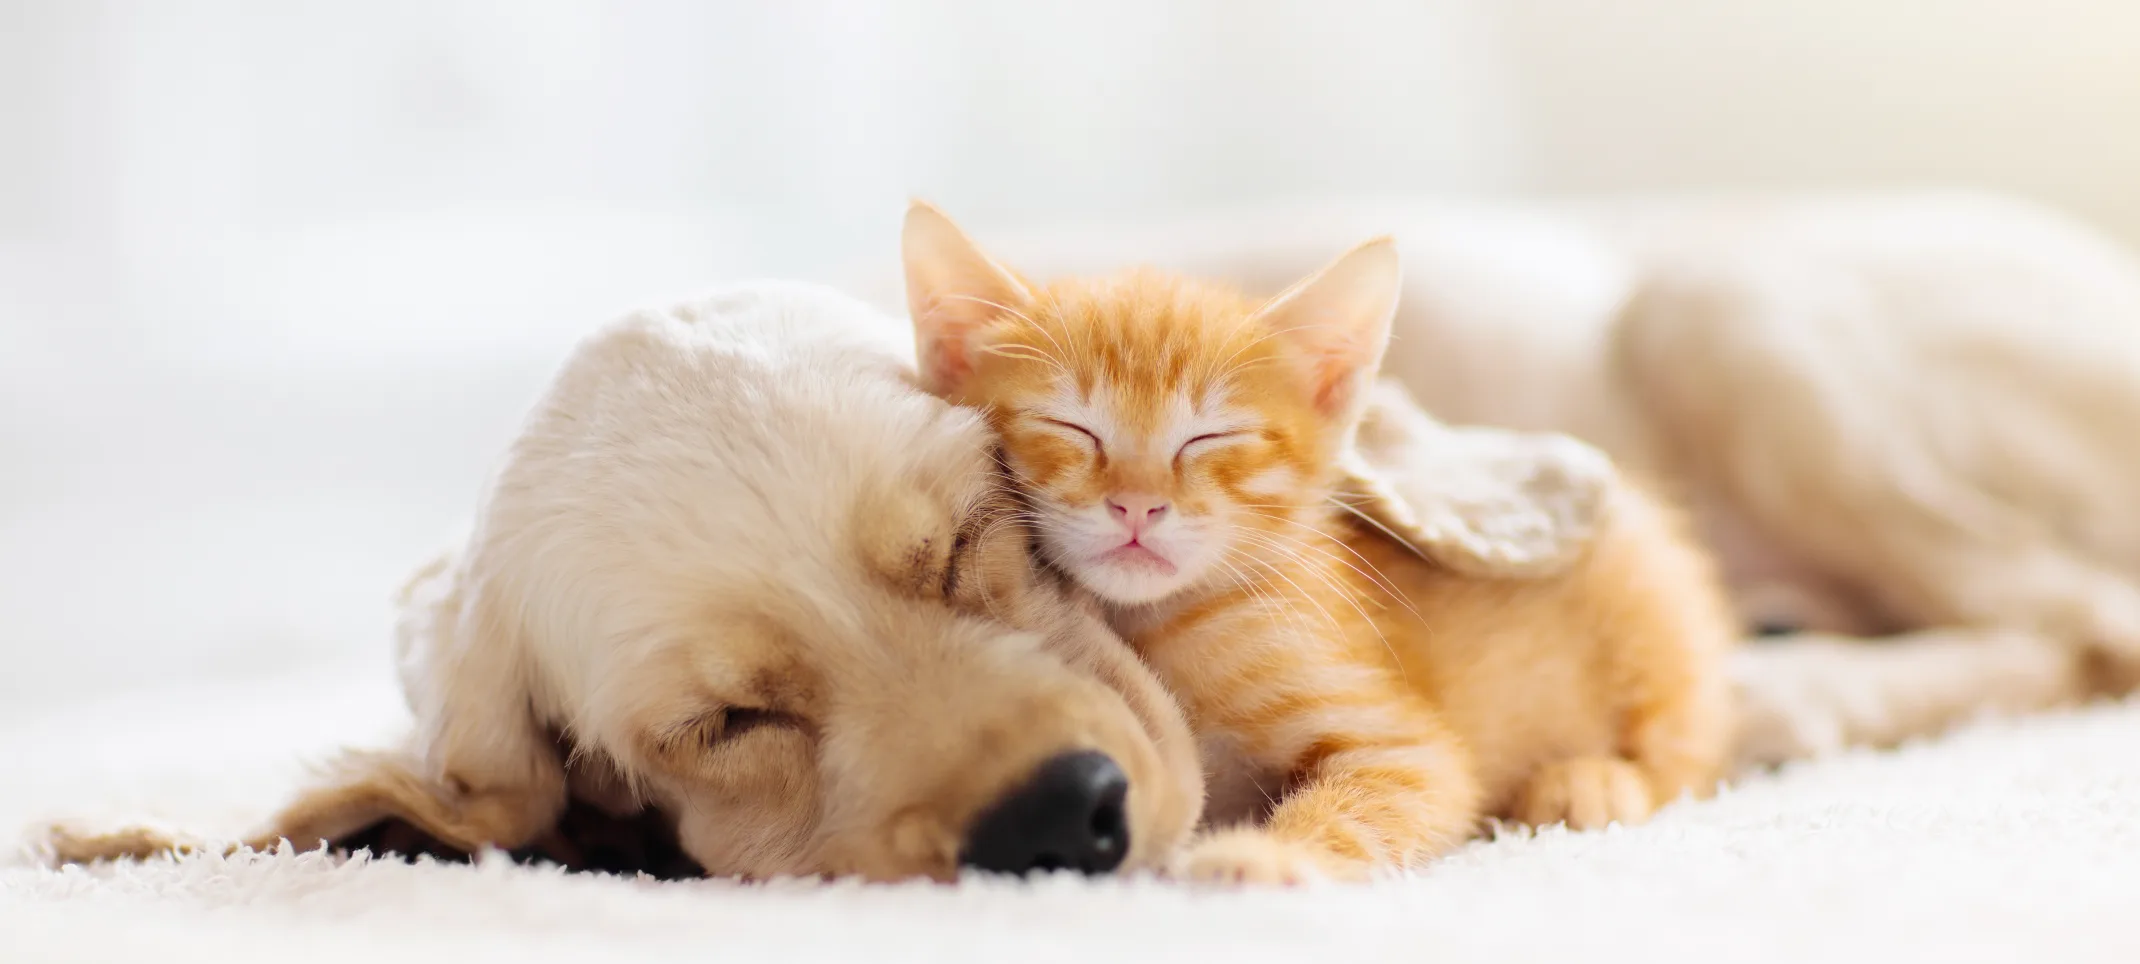 Puppy and Kitten snuggling 